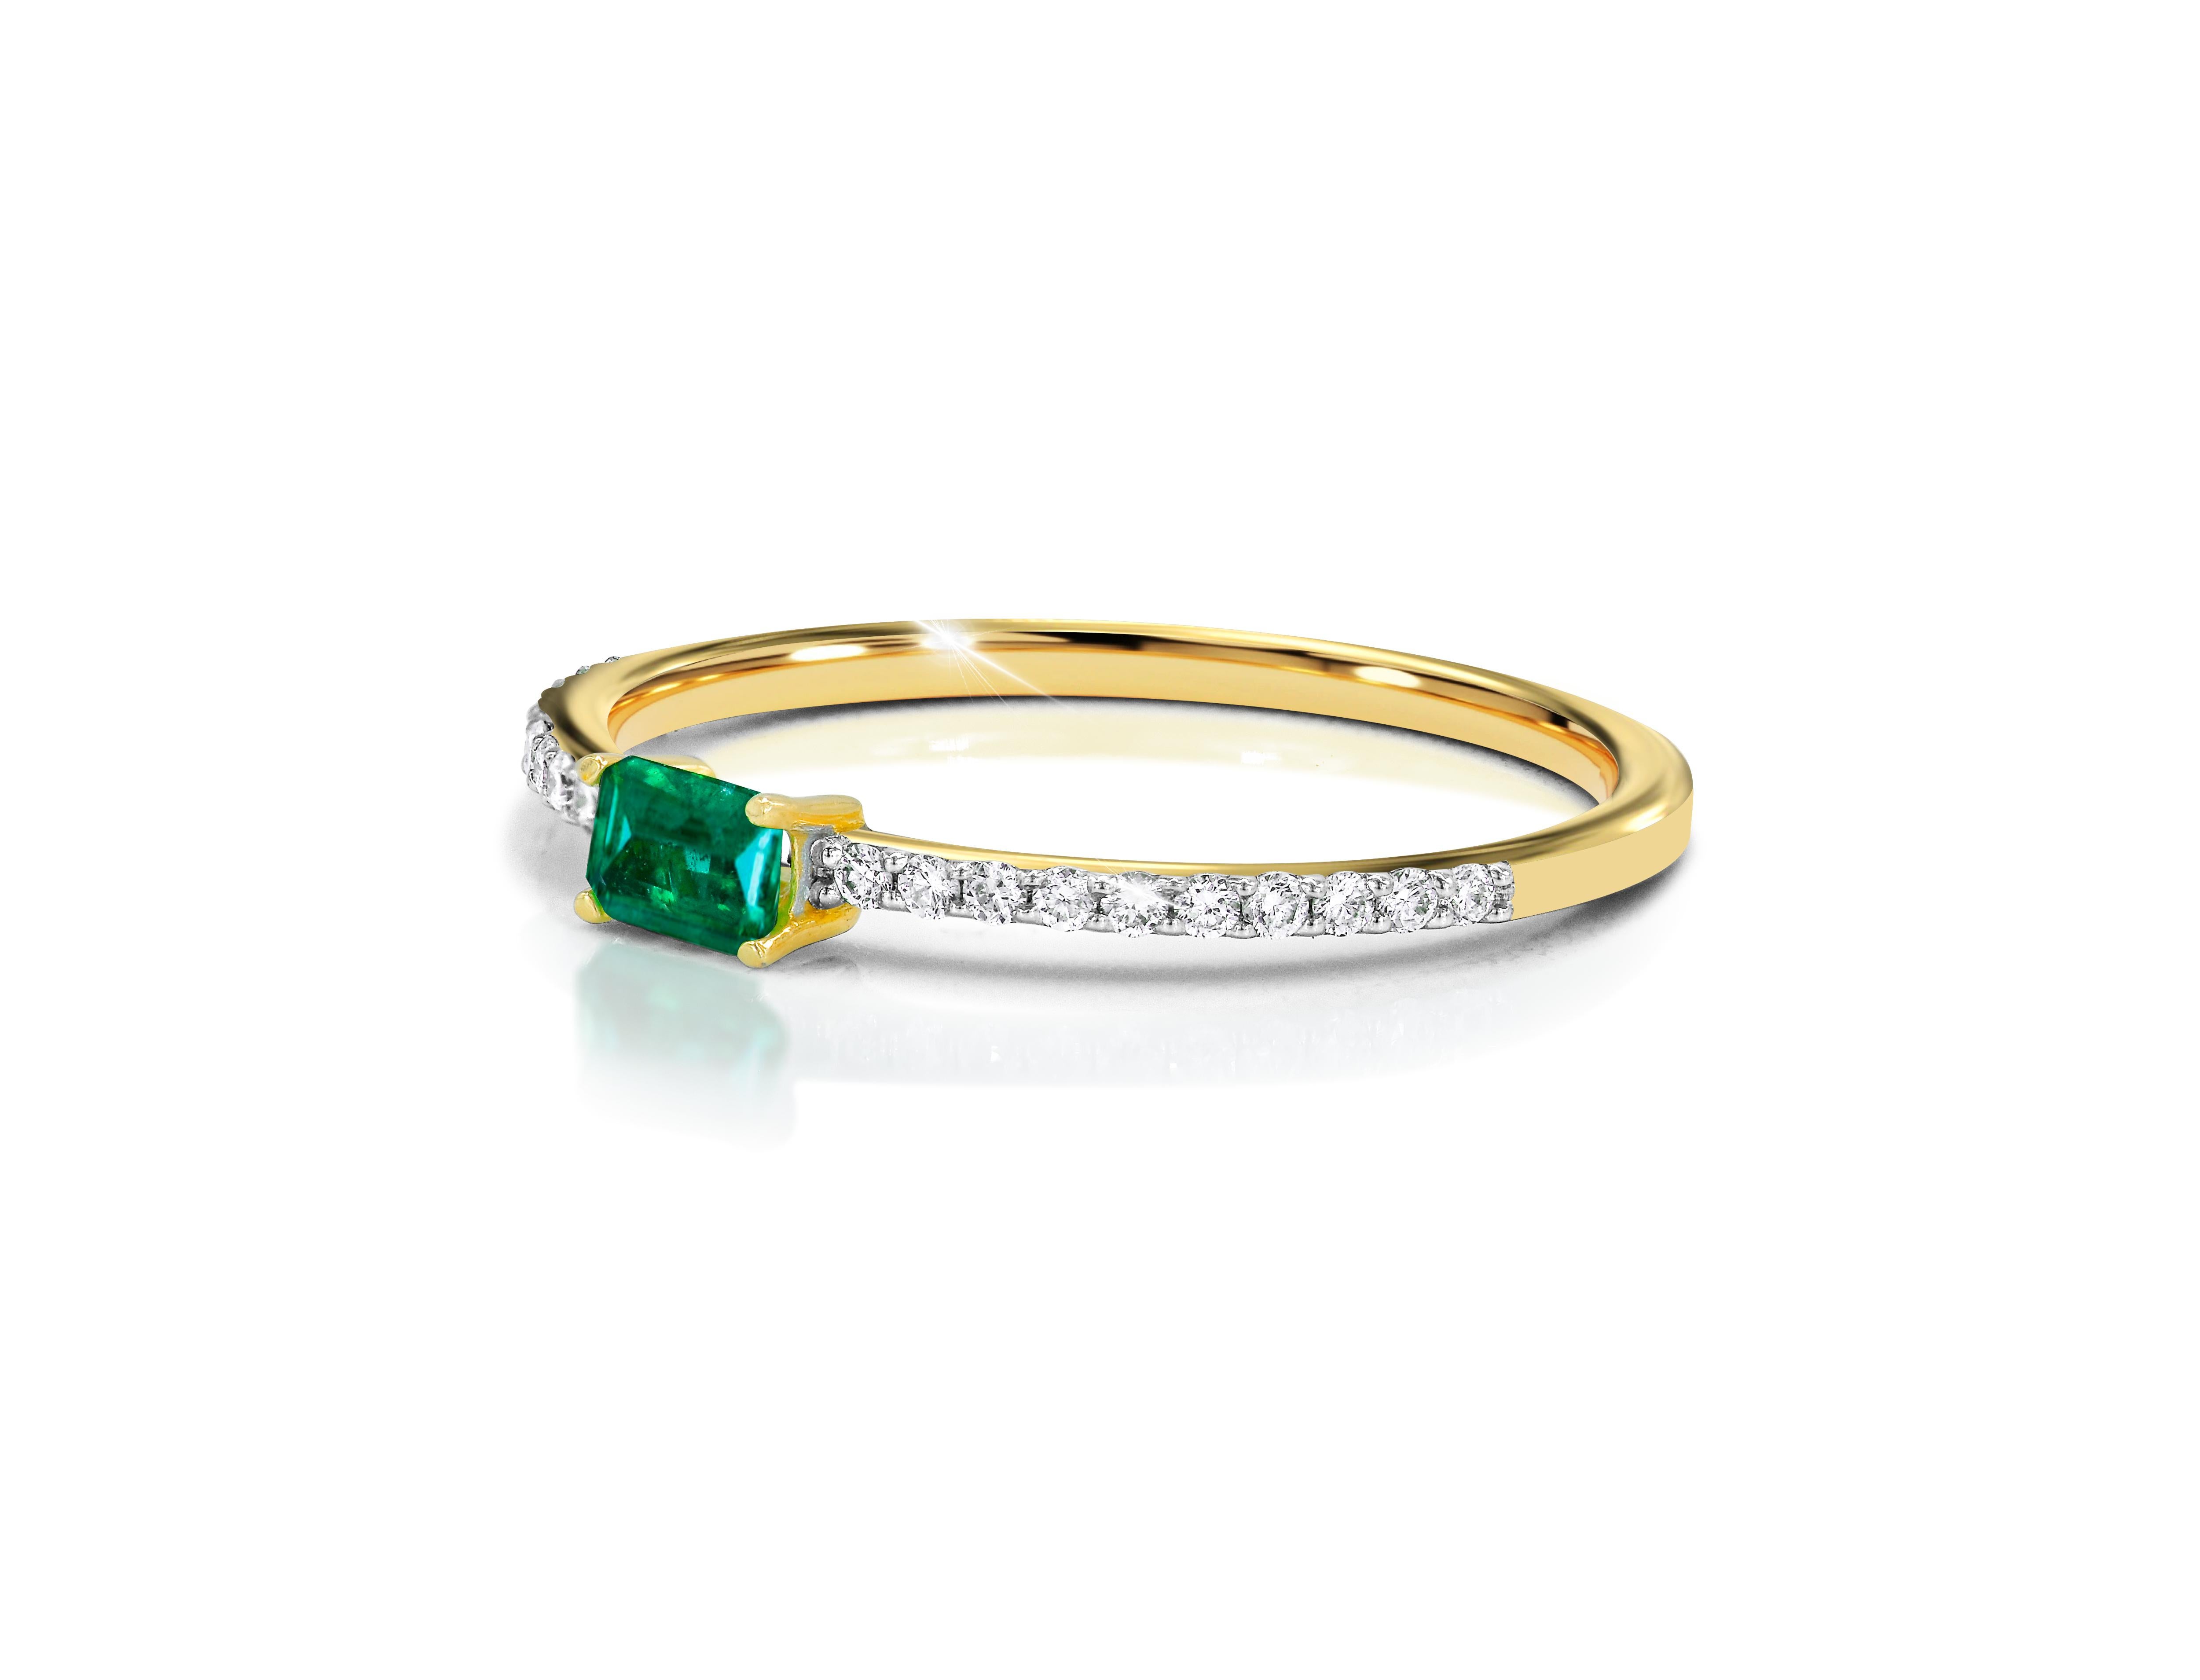 A lightweight and gorgeous emerald ring with sparkly diamonds all over is a beautiful engagement ring. Minimalist yet statement ring is made in Solid gold, Genuine emerald, and diamonds of 0.31 carat. Shop this beautiful piece now.

